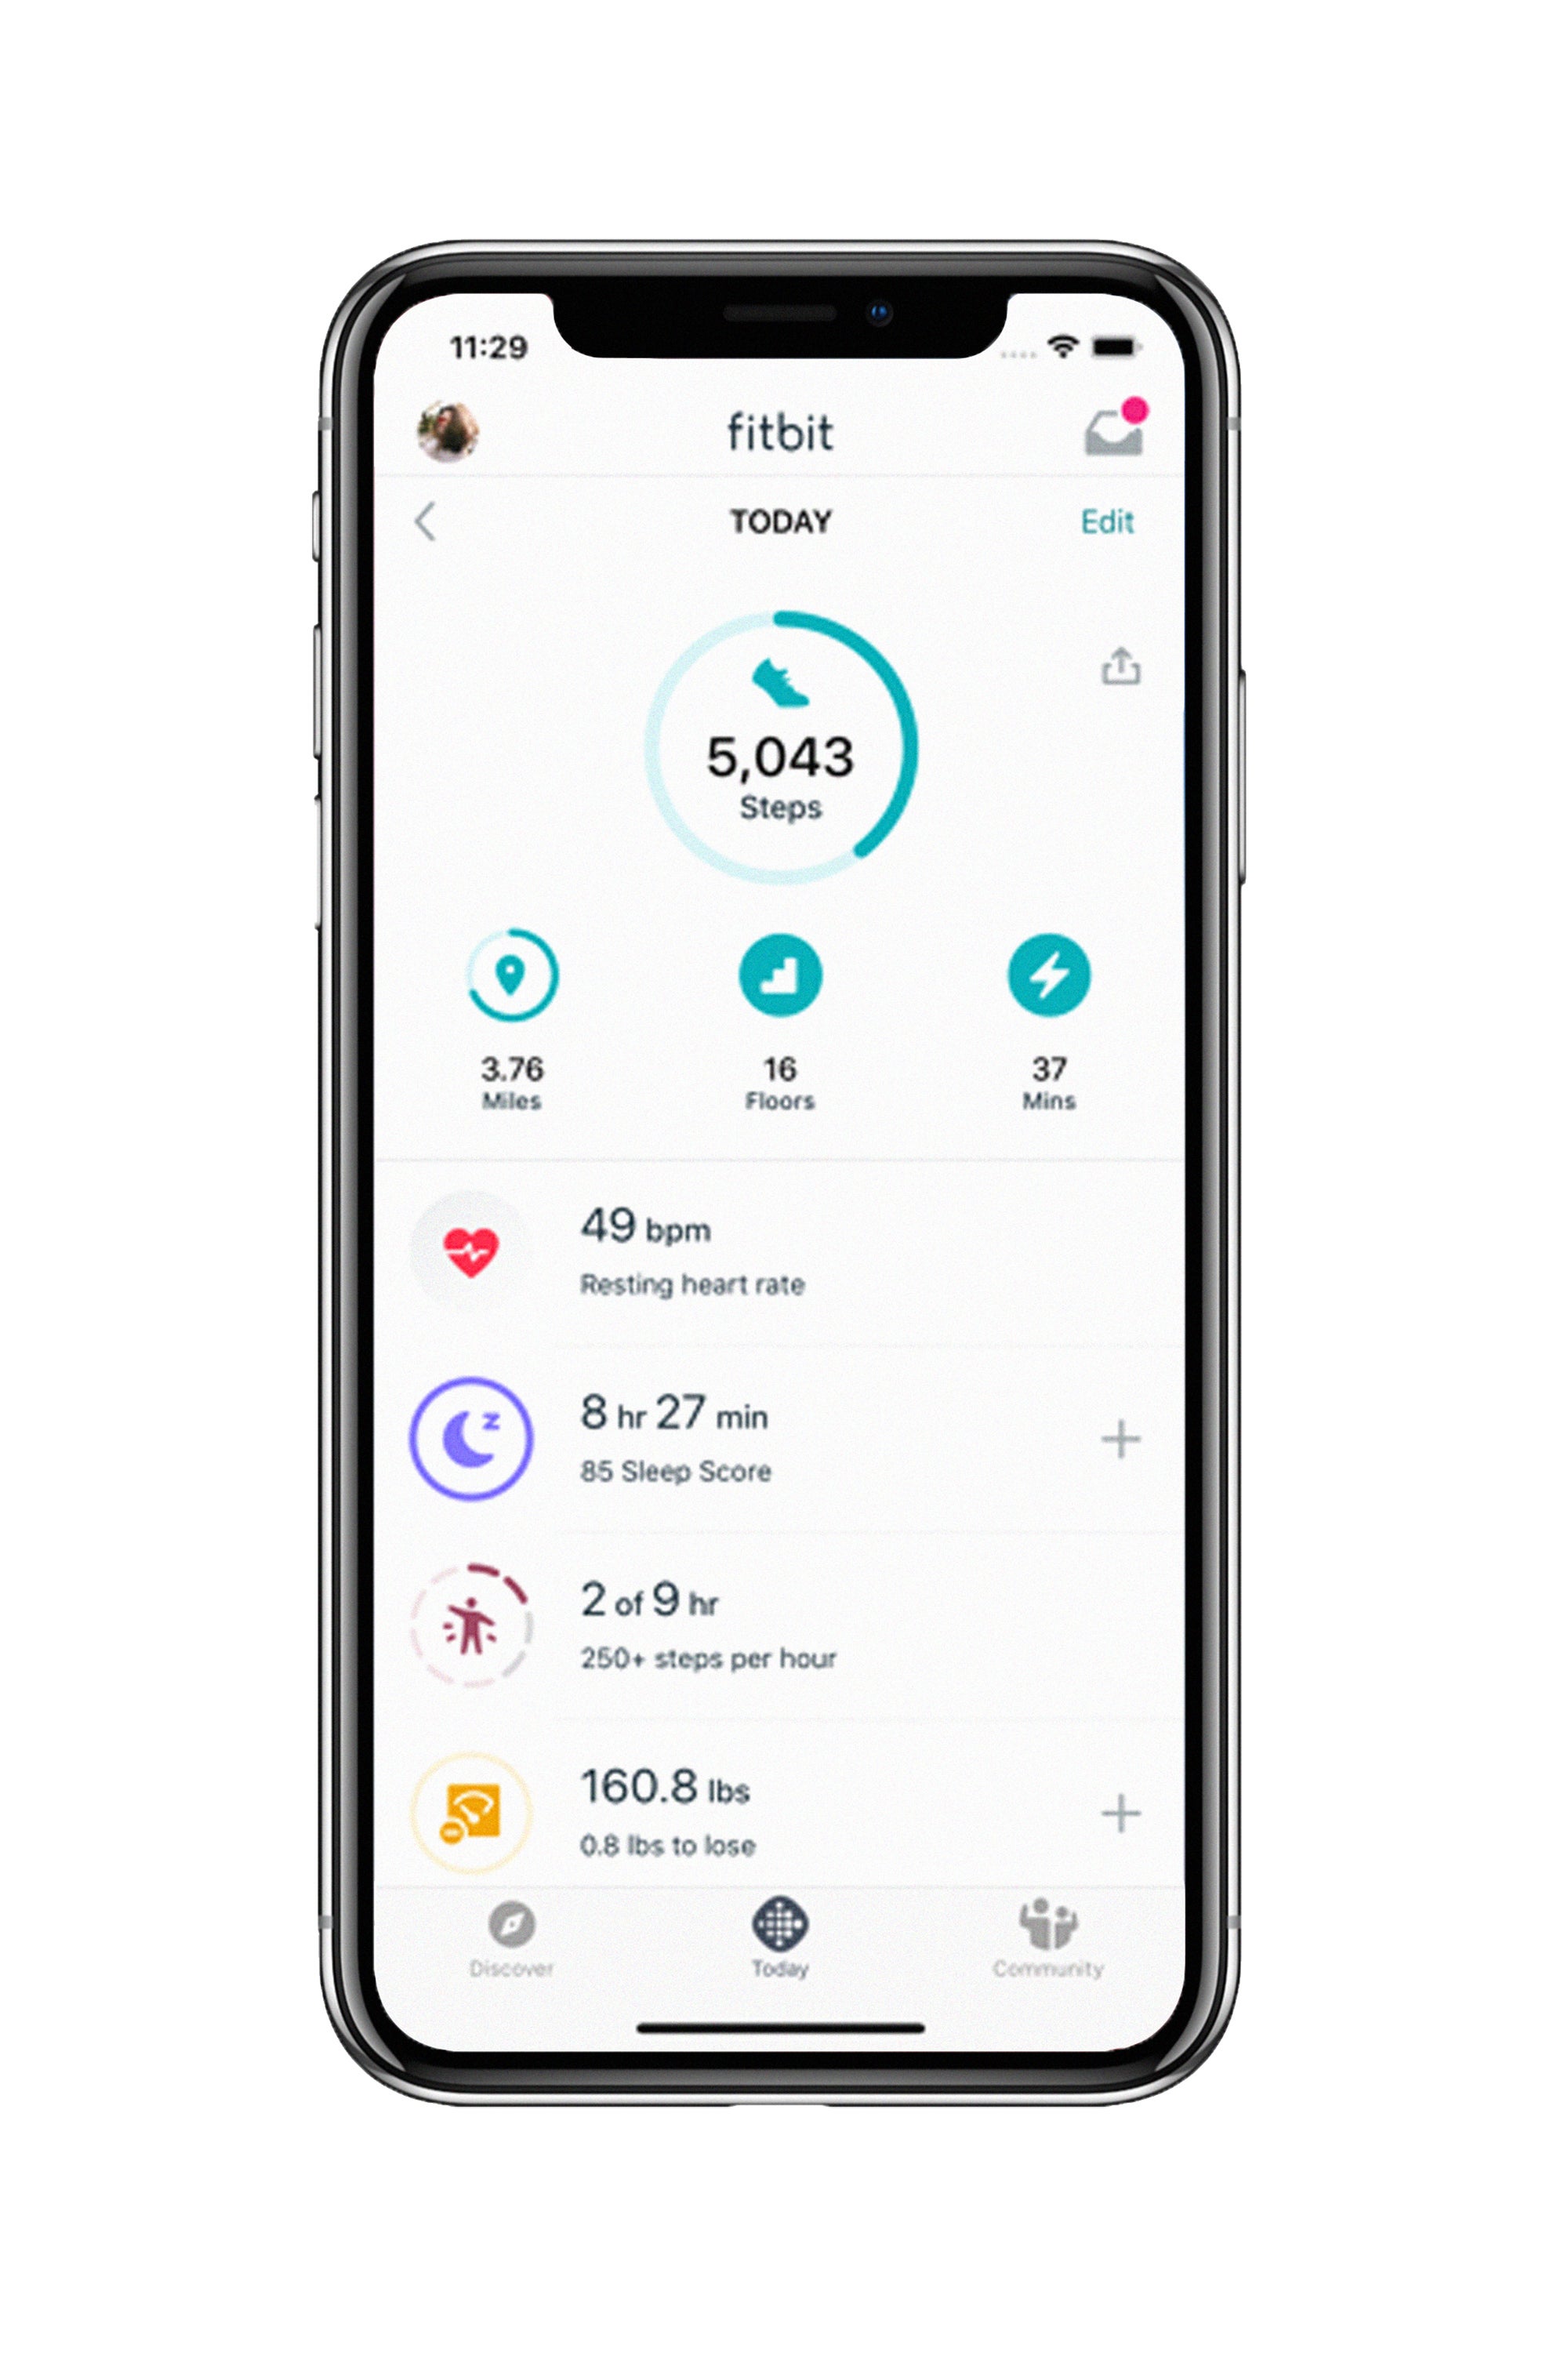 fitbit step counter